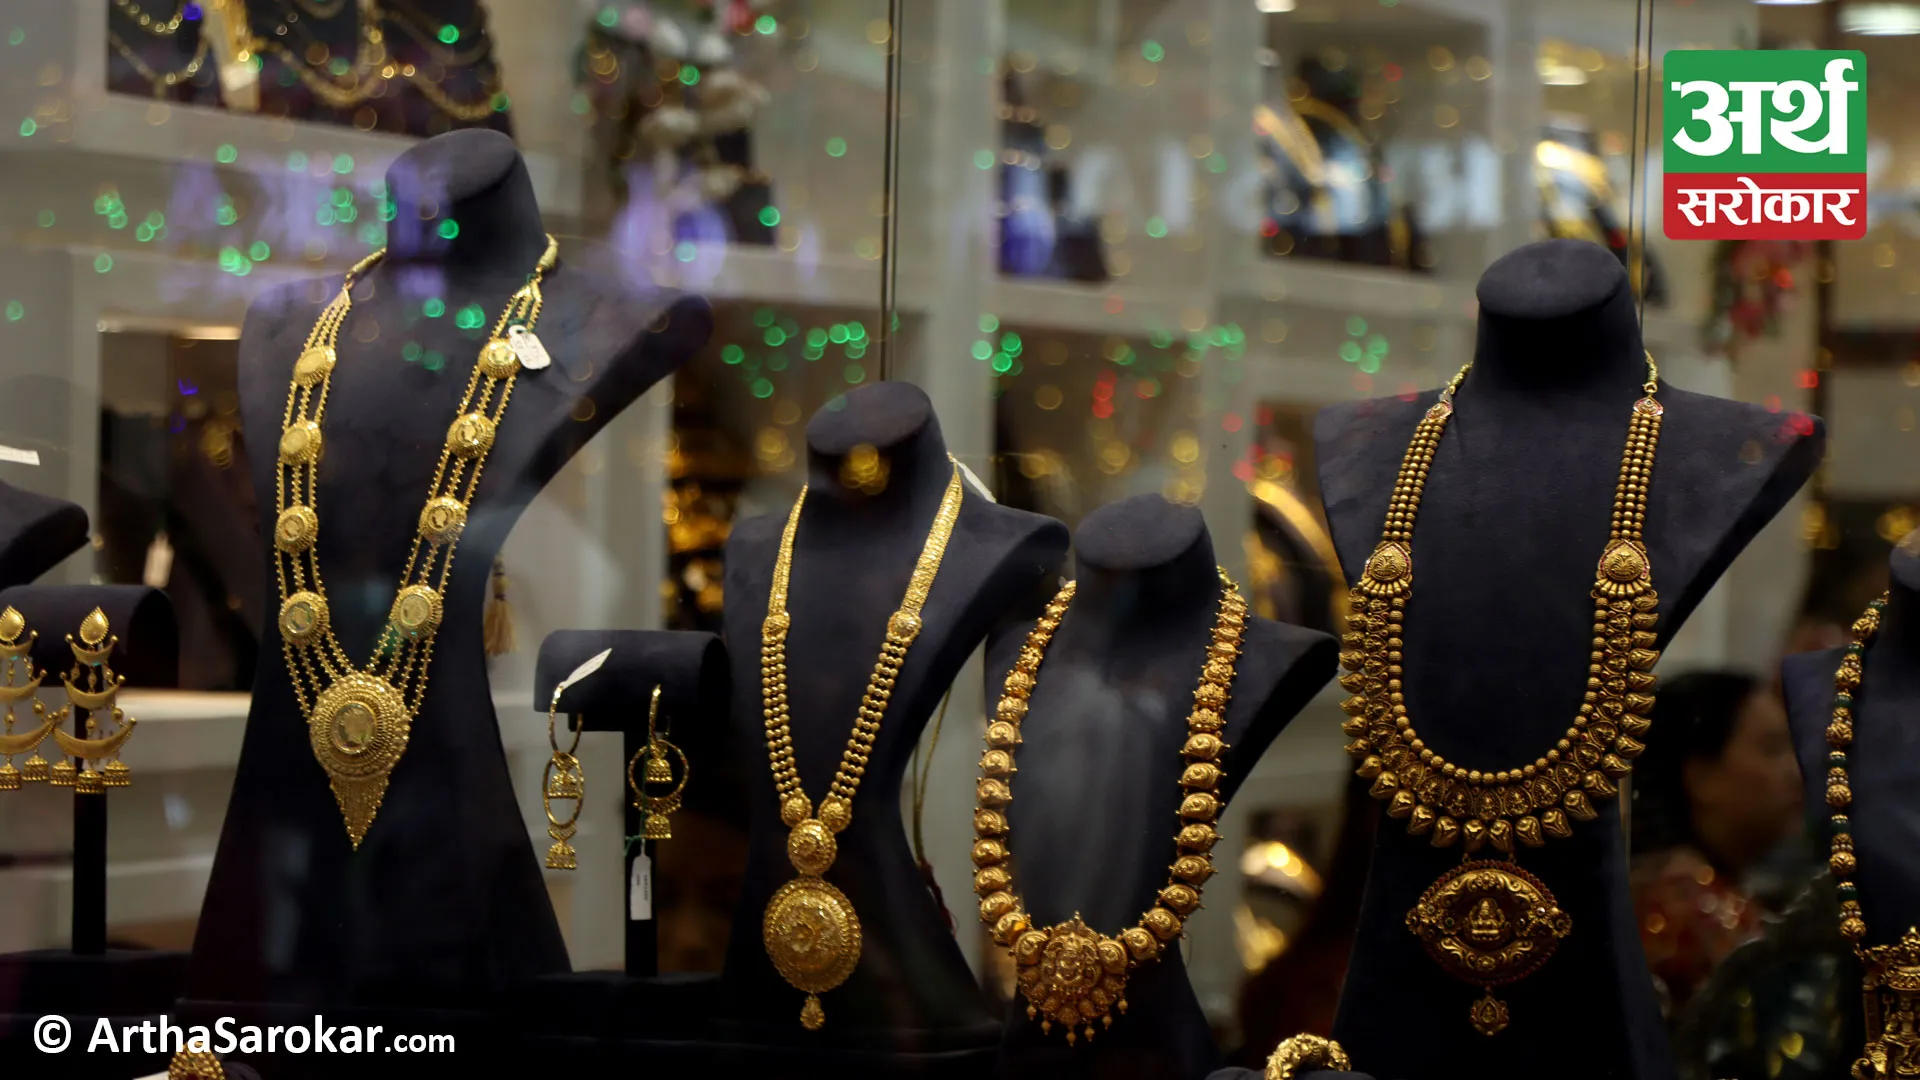 Price of gold decreased by 500 rupees per tola on Sunday